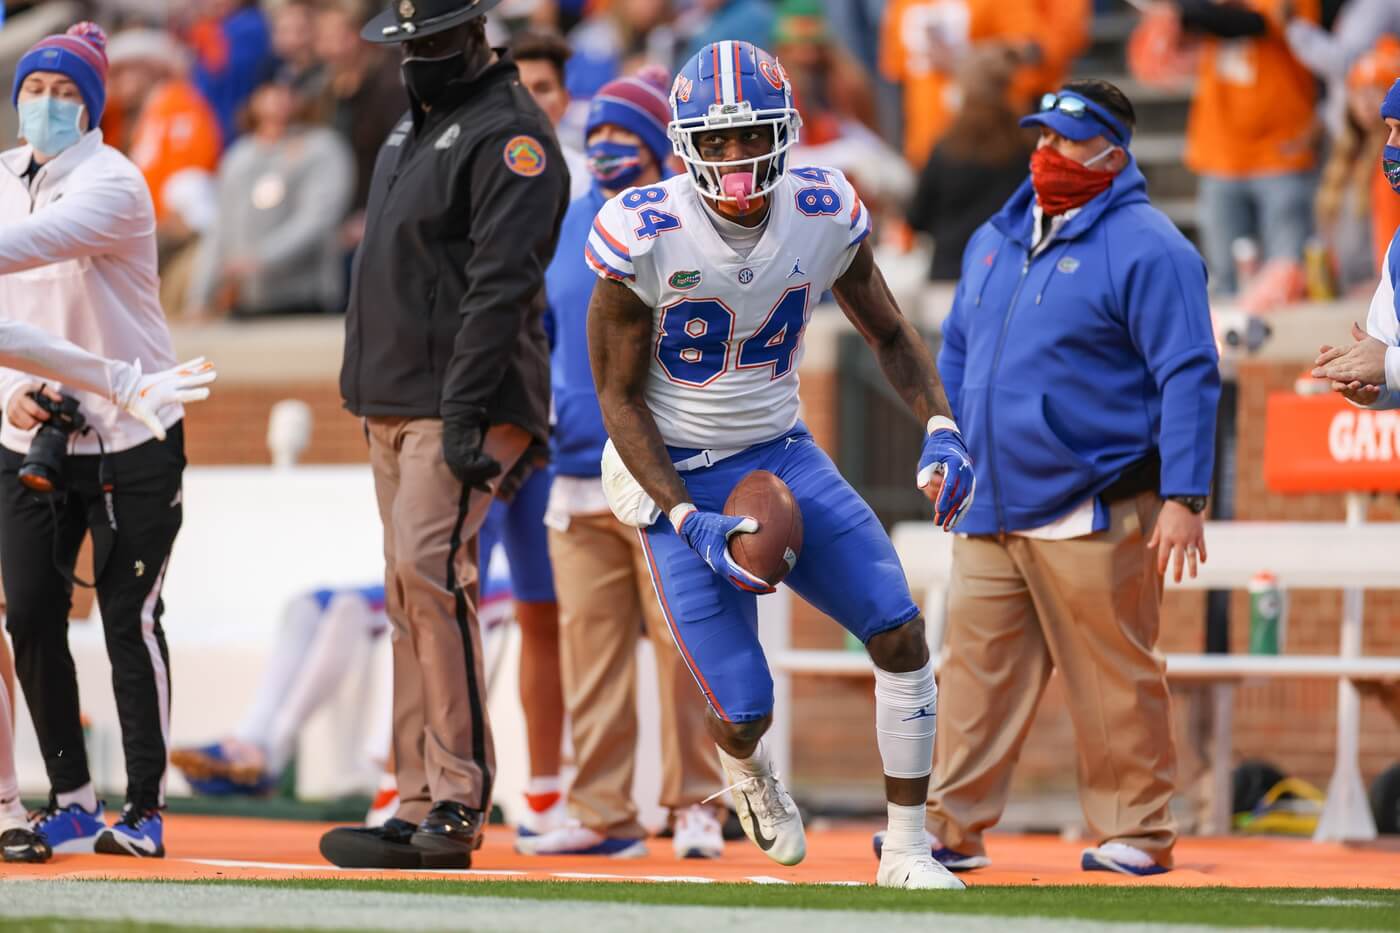 Dec 5, 2020; Knoxville, Tennessee, USA; Florida Gators tight end Kyle Pitts (84) during the first half against the Tennessee Volunteers at Neyland Stadium. Mandatory Credit: Randy Sartin-USA TODAY Sports